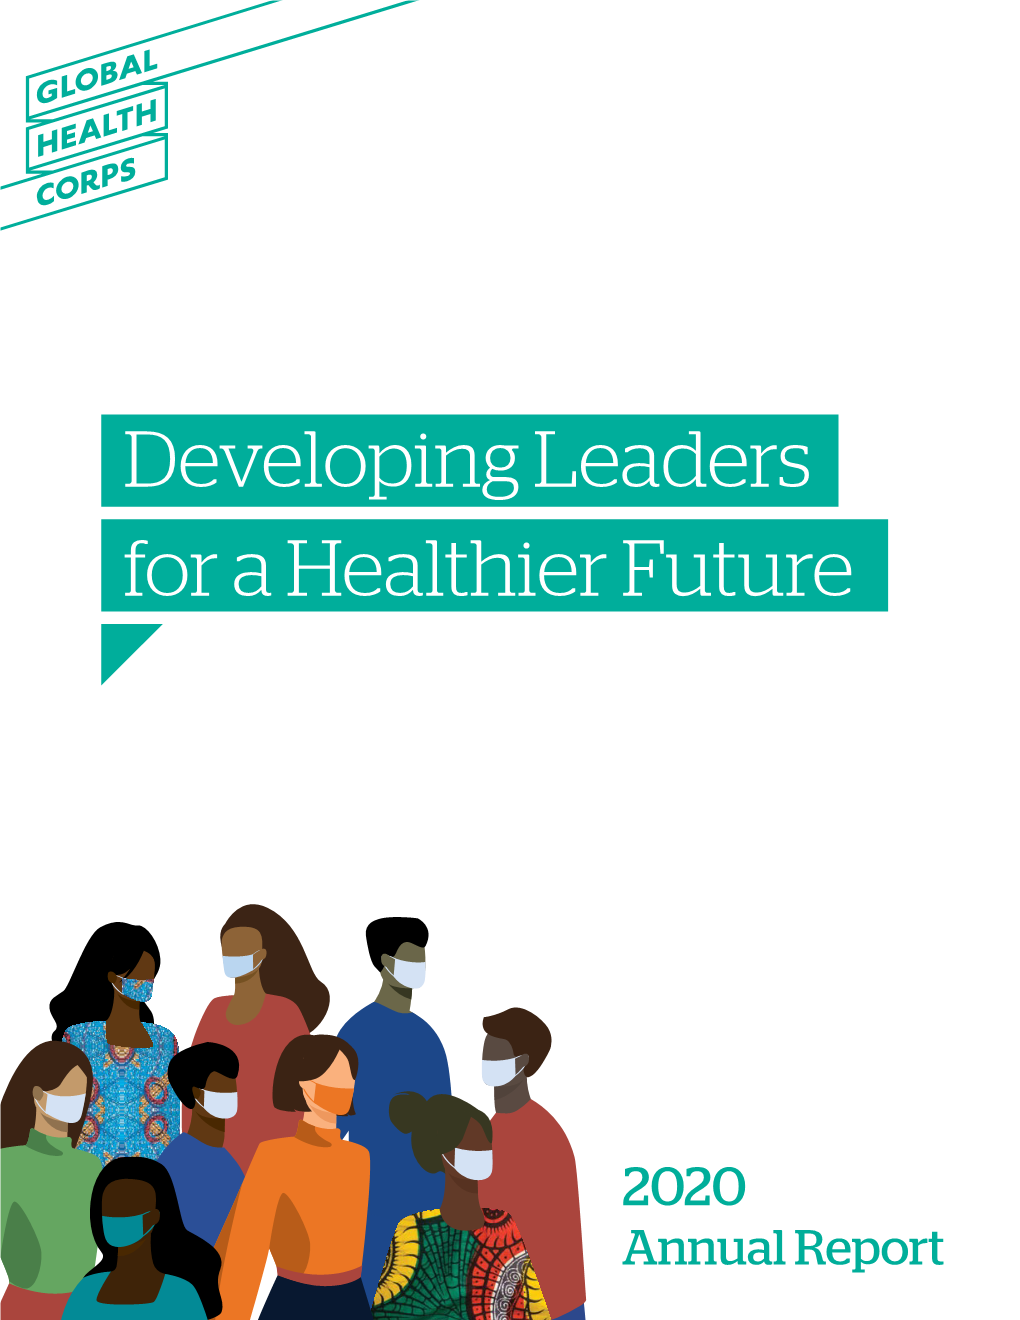 Developing Leaders for a Healthier Future